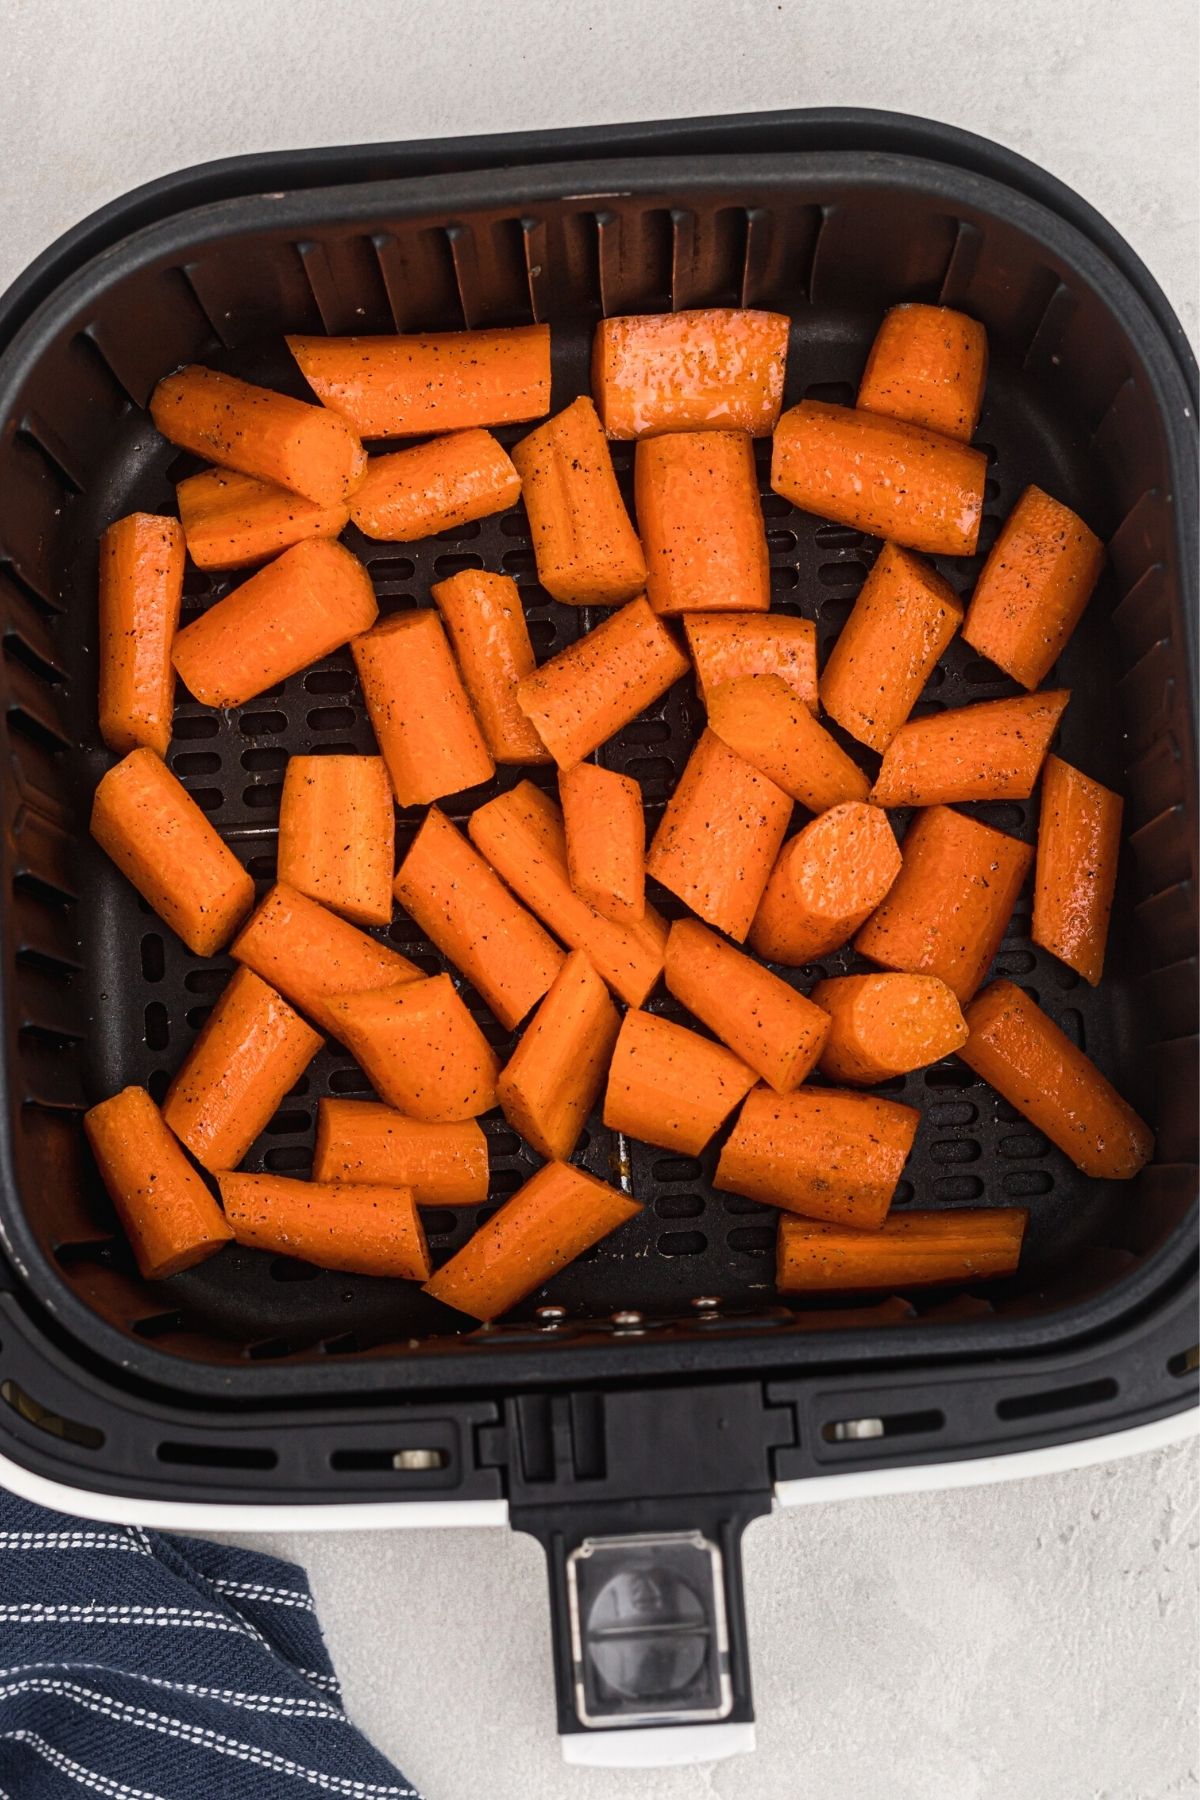 Uncooked chopped carrots in the air fryer basket after being seasoned